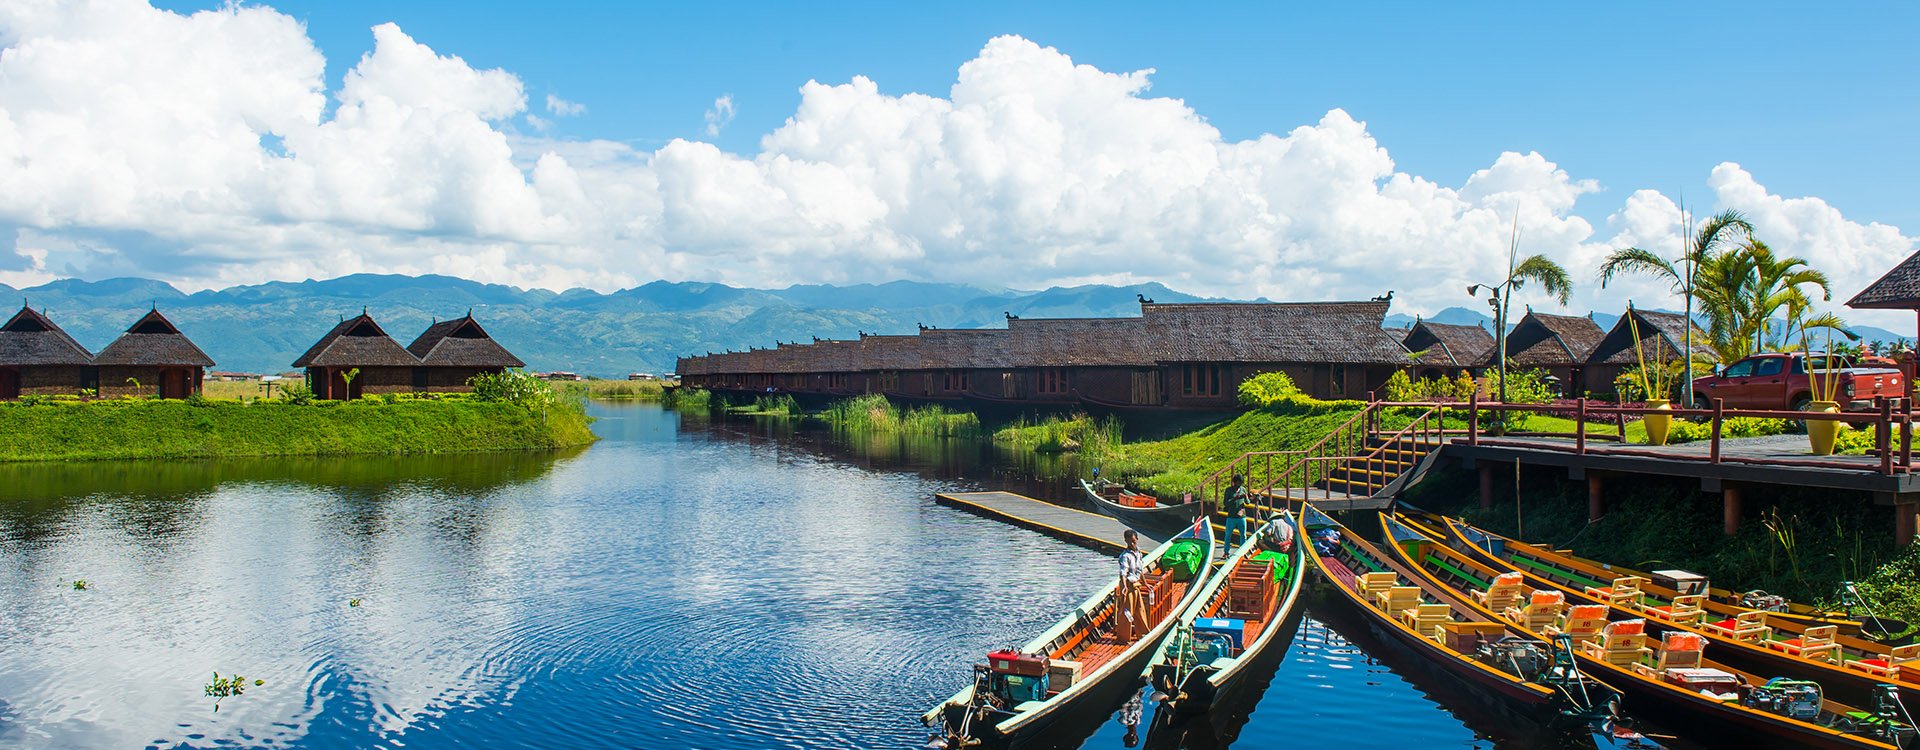 River boats on Inle lake shan state Myanmar on a clear sunny day